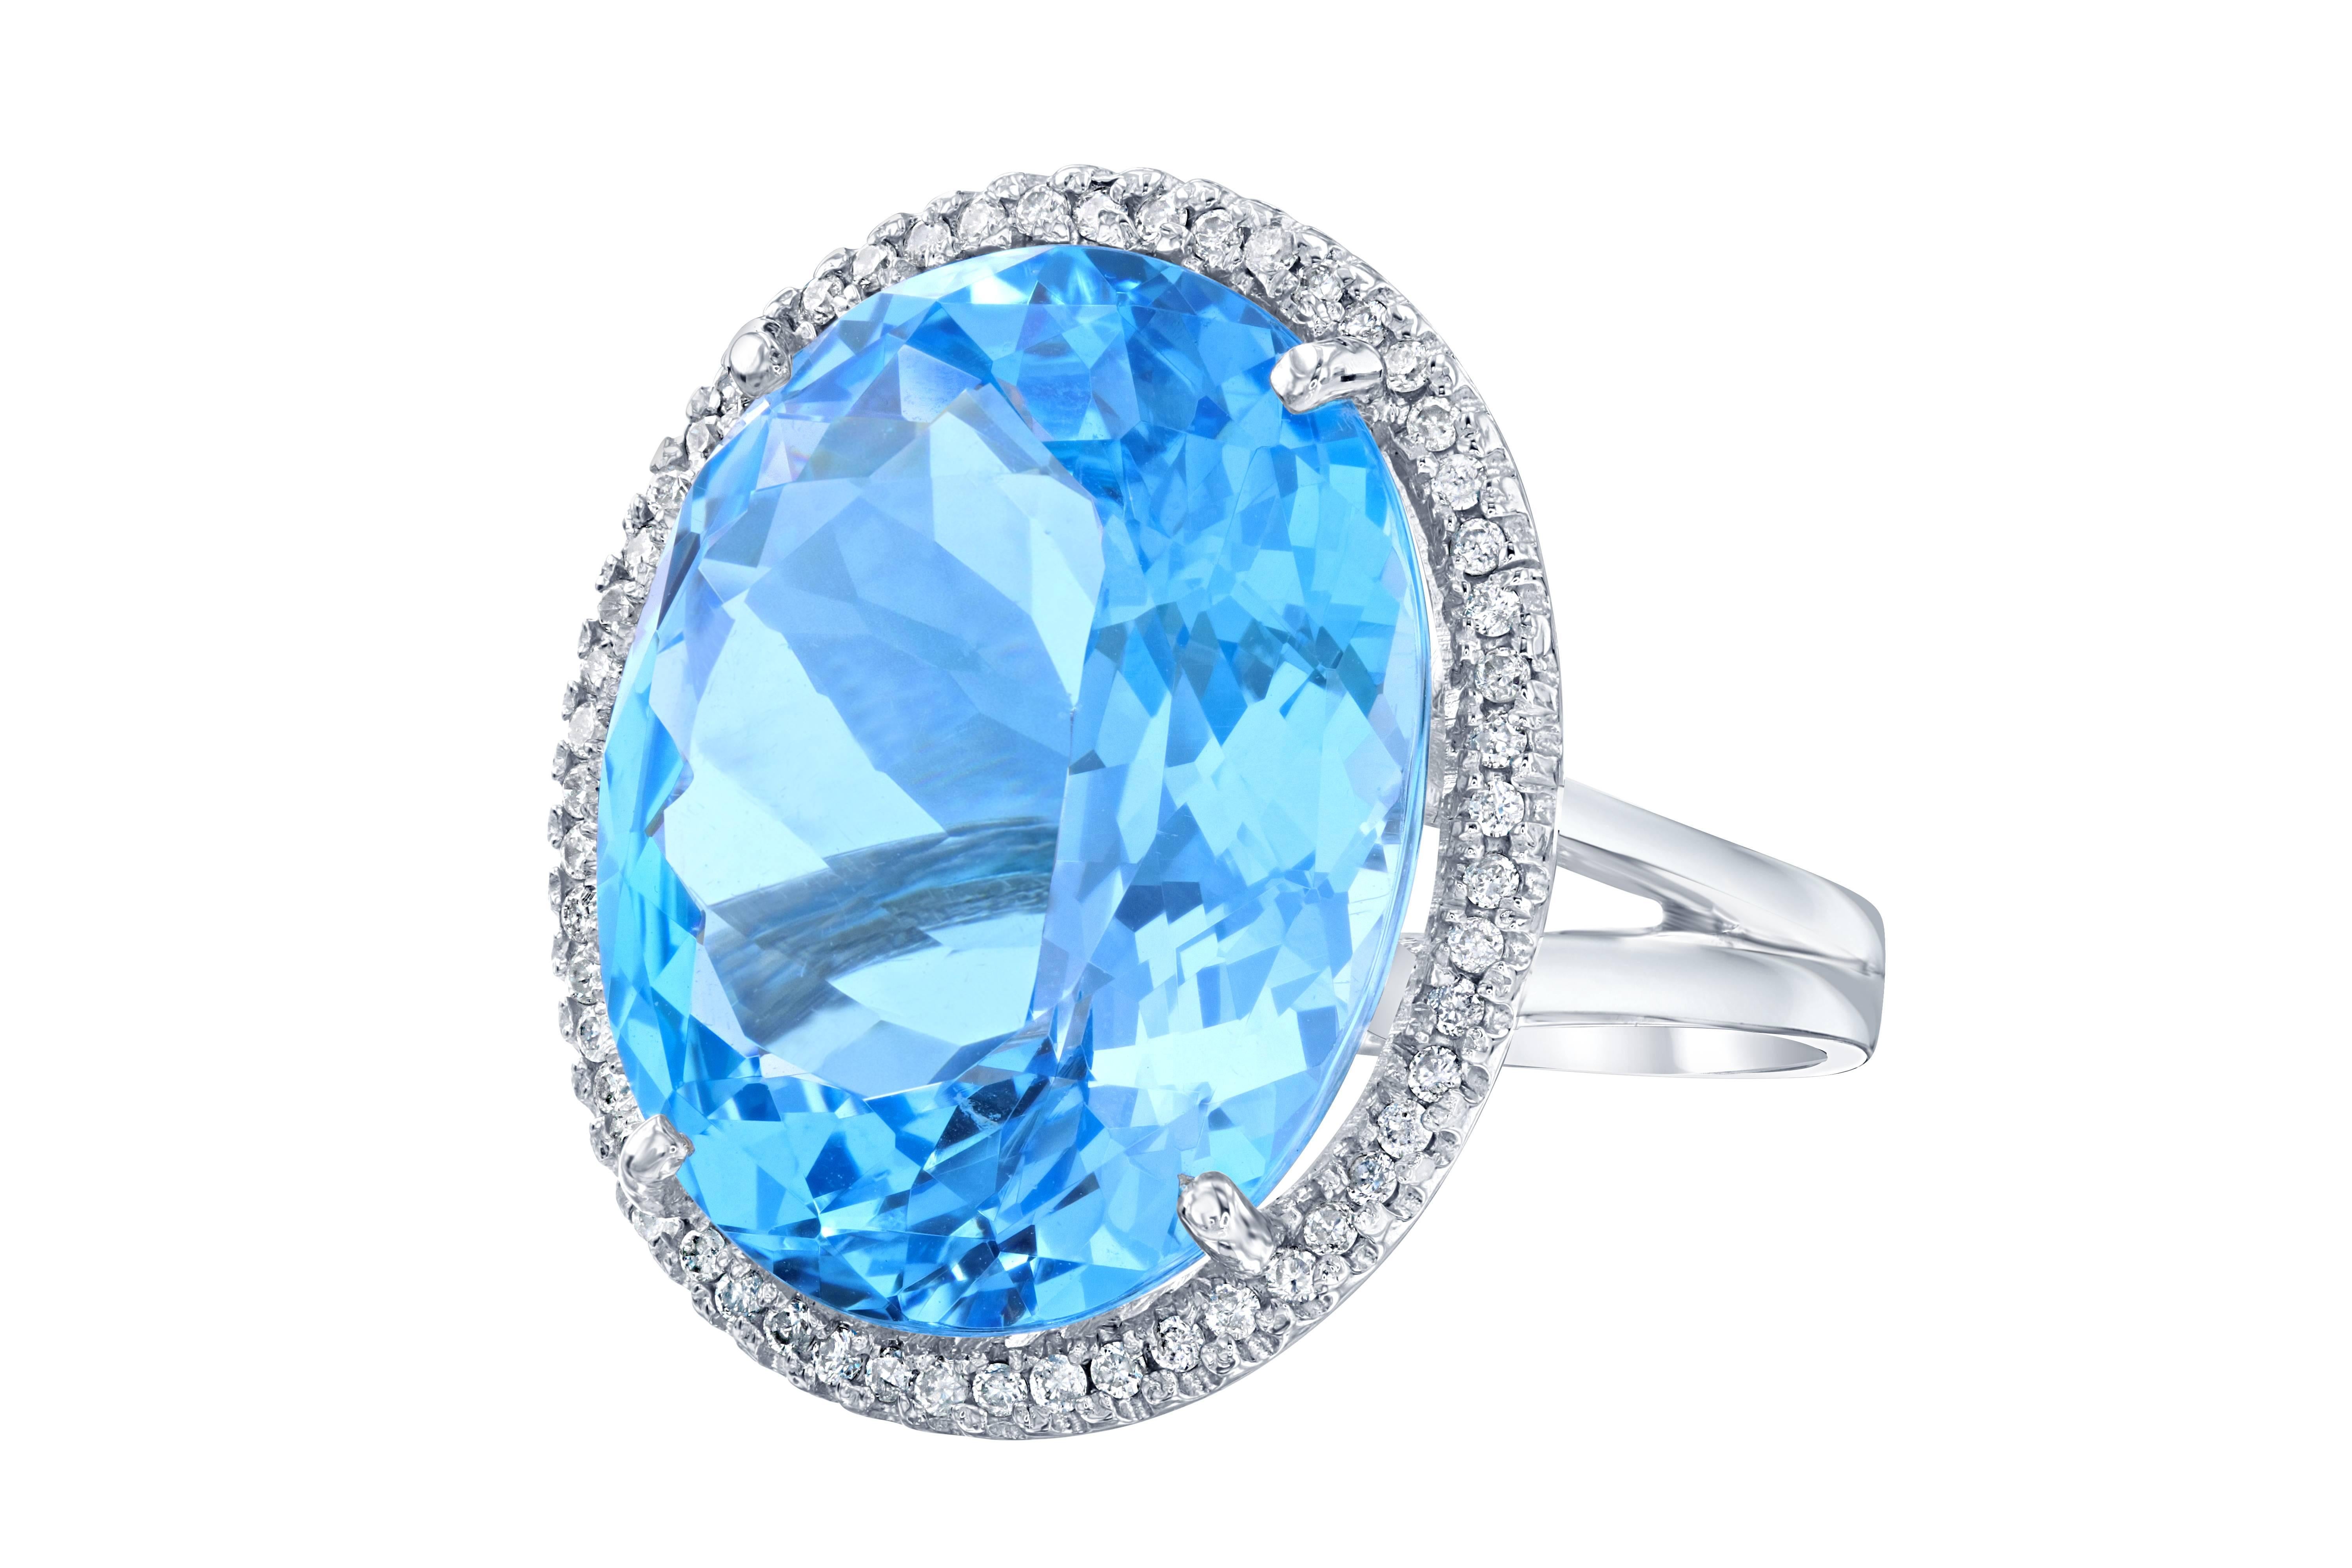 A true statement piece!  This stunning ring has a huge Oval cut Blue Topaz that weighs 29.49 carats and is surrounded by a halo of  54 Round Cut Diamonds that weigh 0.34 carat (Clarity: SI2, Color: F). The ring is made in 14K White Gold and weighs